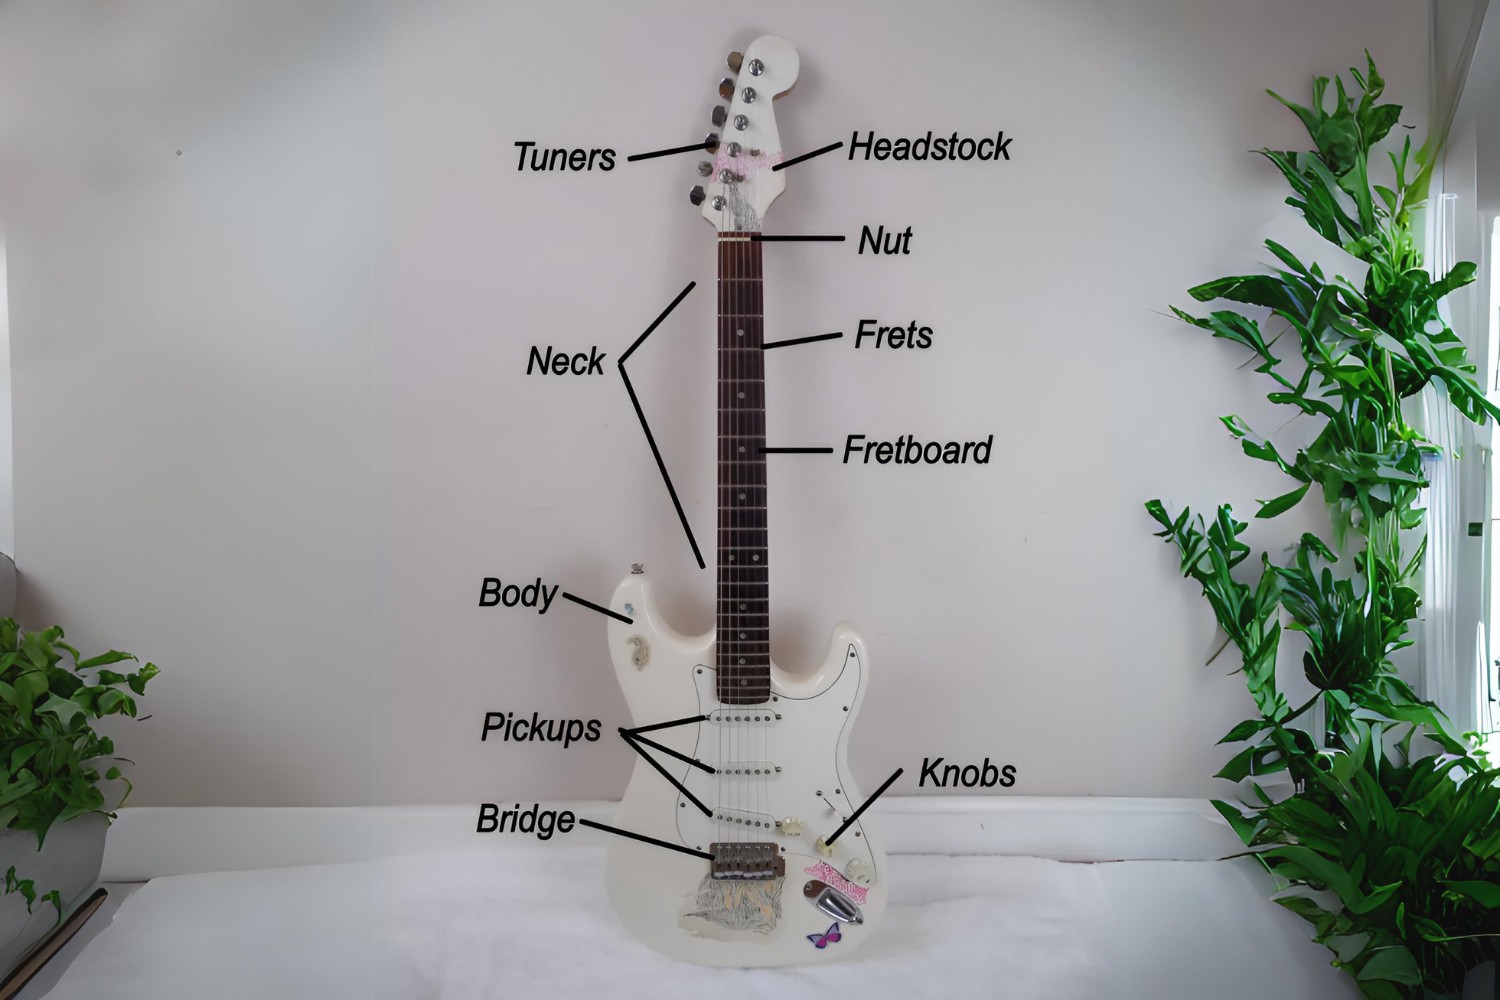 What Are The Parts Of An Electric Guitar Called